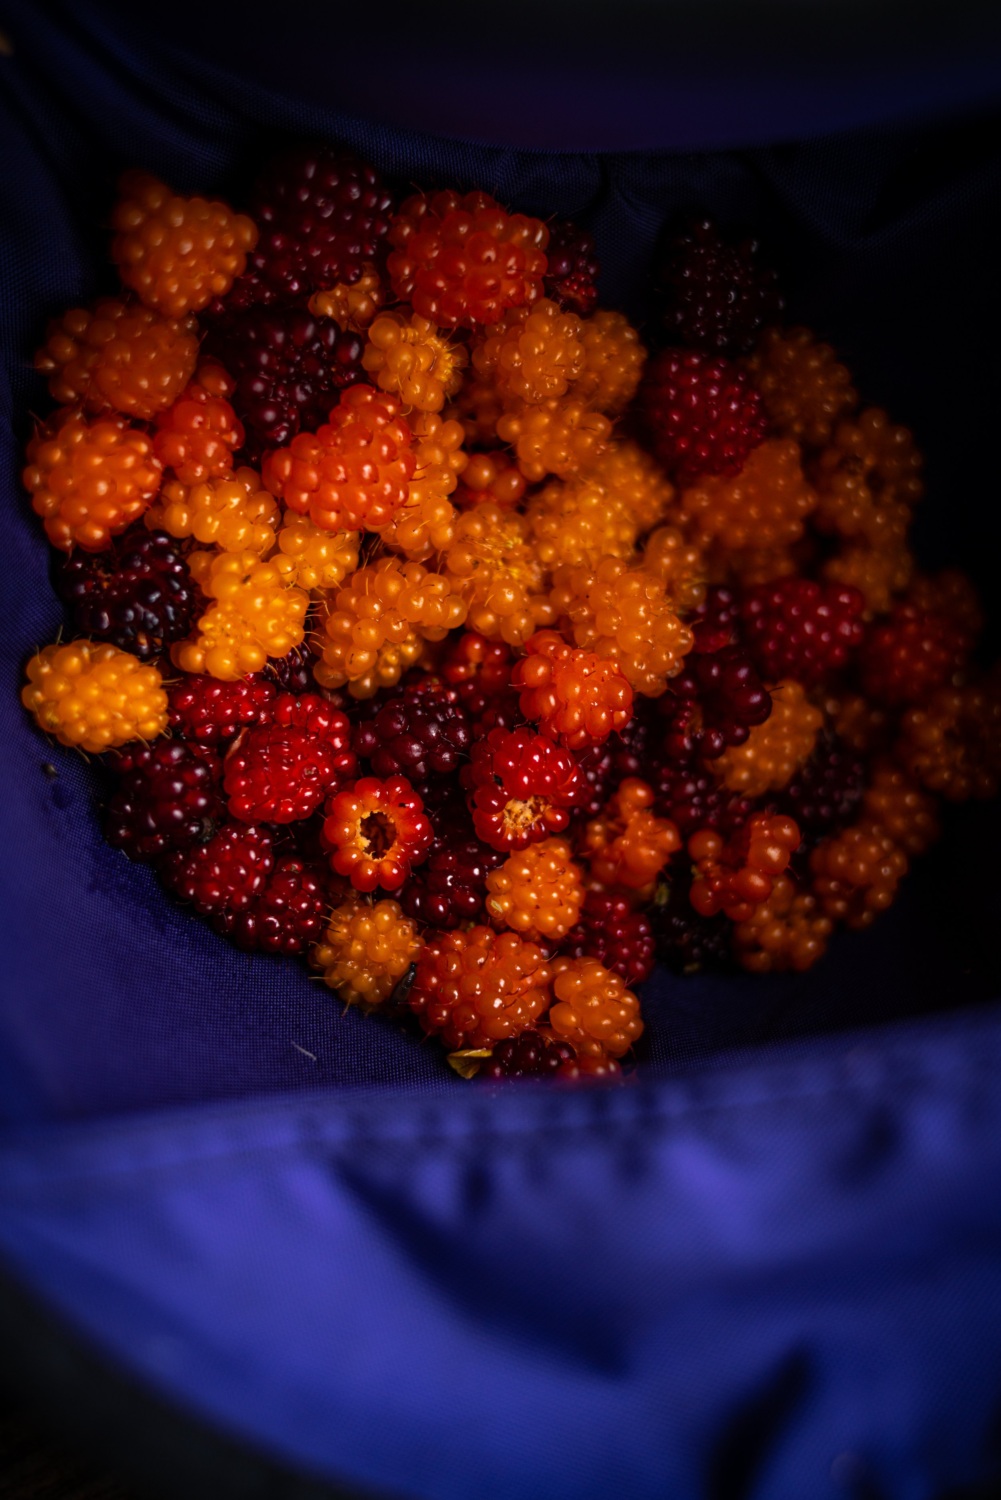 Salmon berries being harvested for personal use.